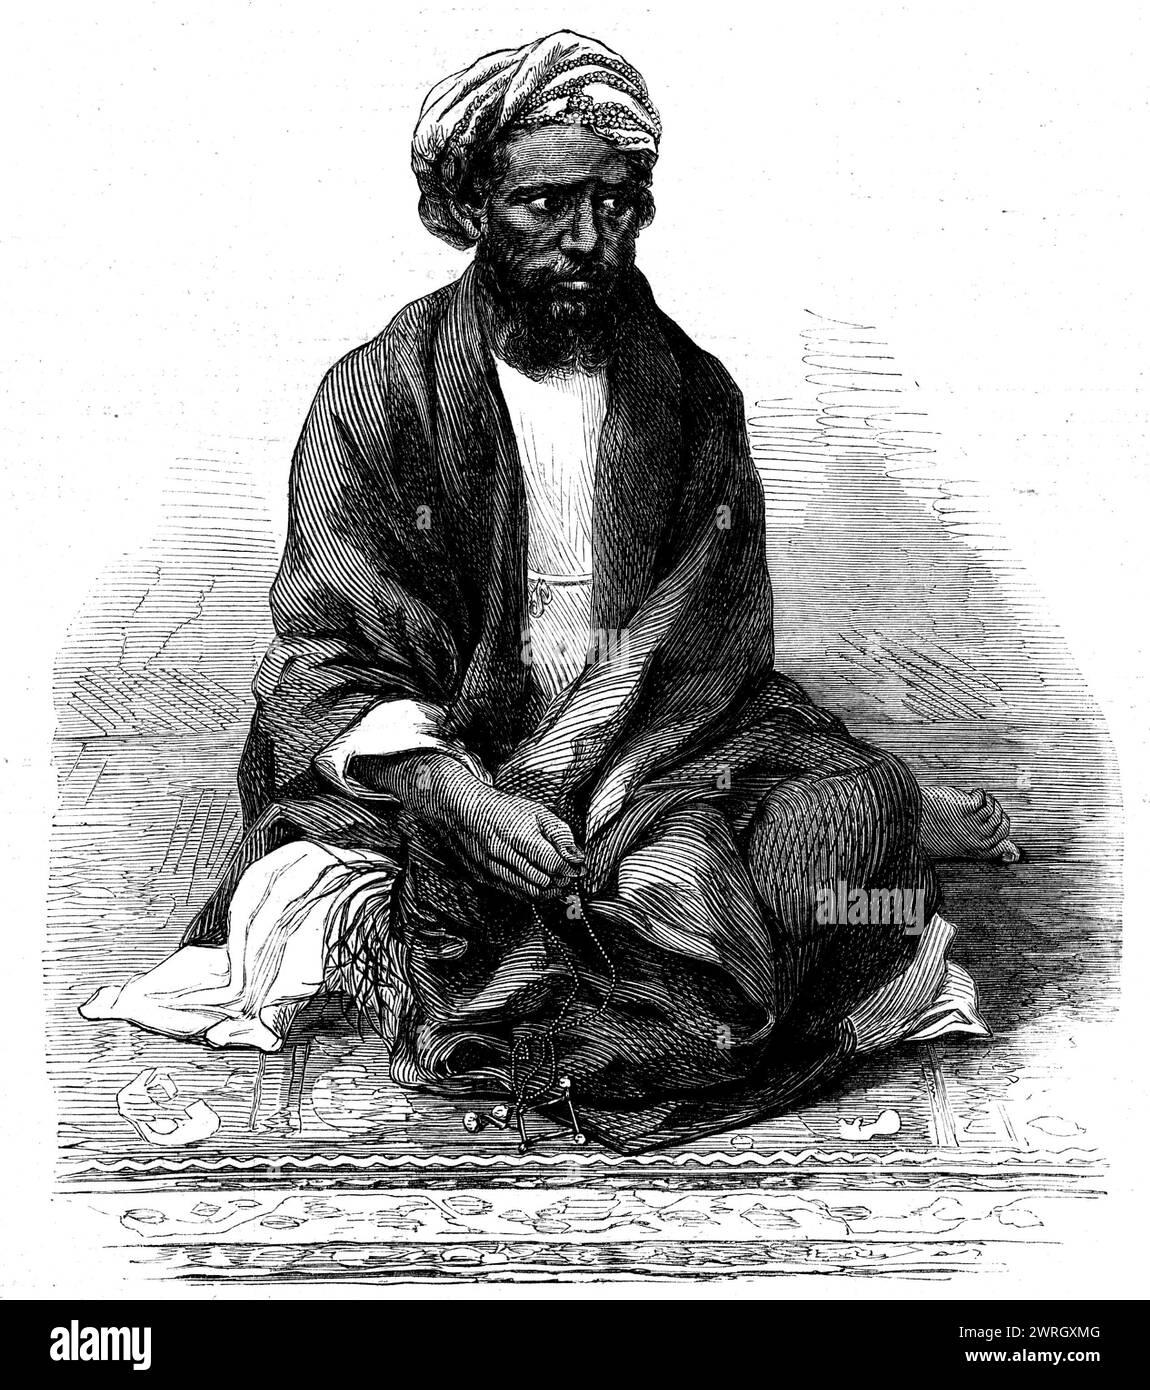 Indian rebel, Zahoor-ool-Hoosein, recently captured, 1862. Engraving from a photograph '...taken at Poona by Lieutenant-Colonel I. D. Stewart, of the Bombay [ie British Indian] army...of one of the leaders in the Indian mutiny of 1857...This rebel, who has so long evaded justice, has recently been captured in the Bombay Presidency, and is about to be forwarded to Oude for trial...The Police Commissioner N. D. in reporting this important capture justly notes it &quot;as a remarkable instance of the retribution which is slowly but surely overtaking all the principal criminals and leaders of the Stock Photo